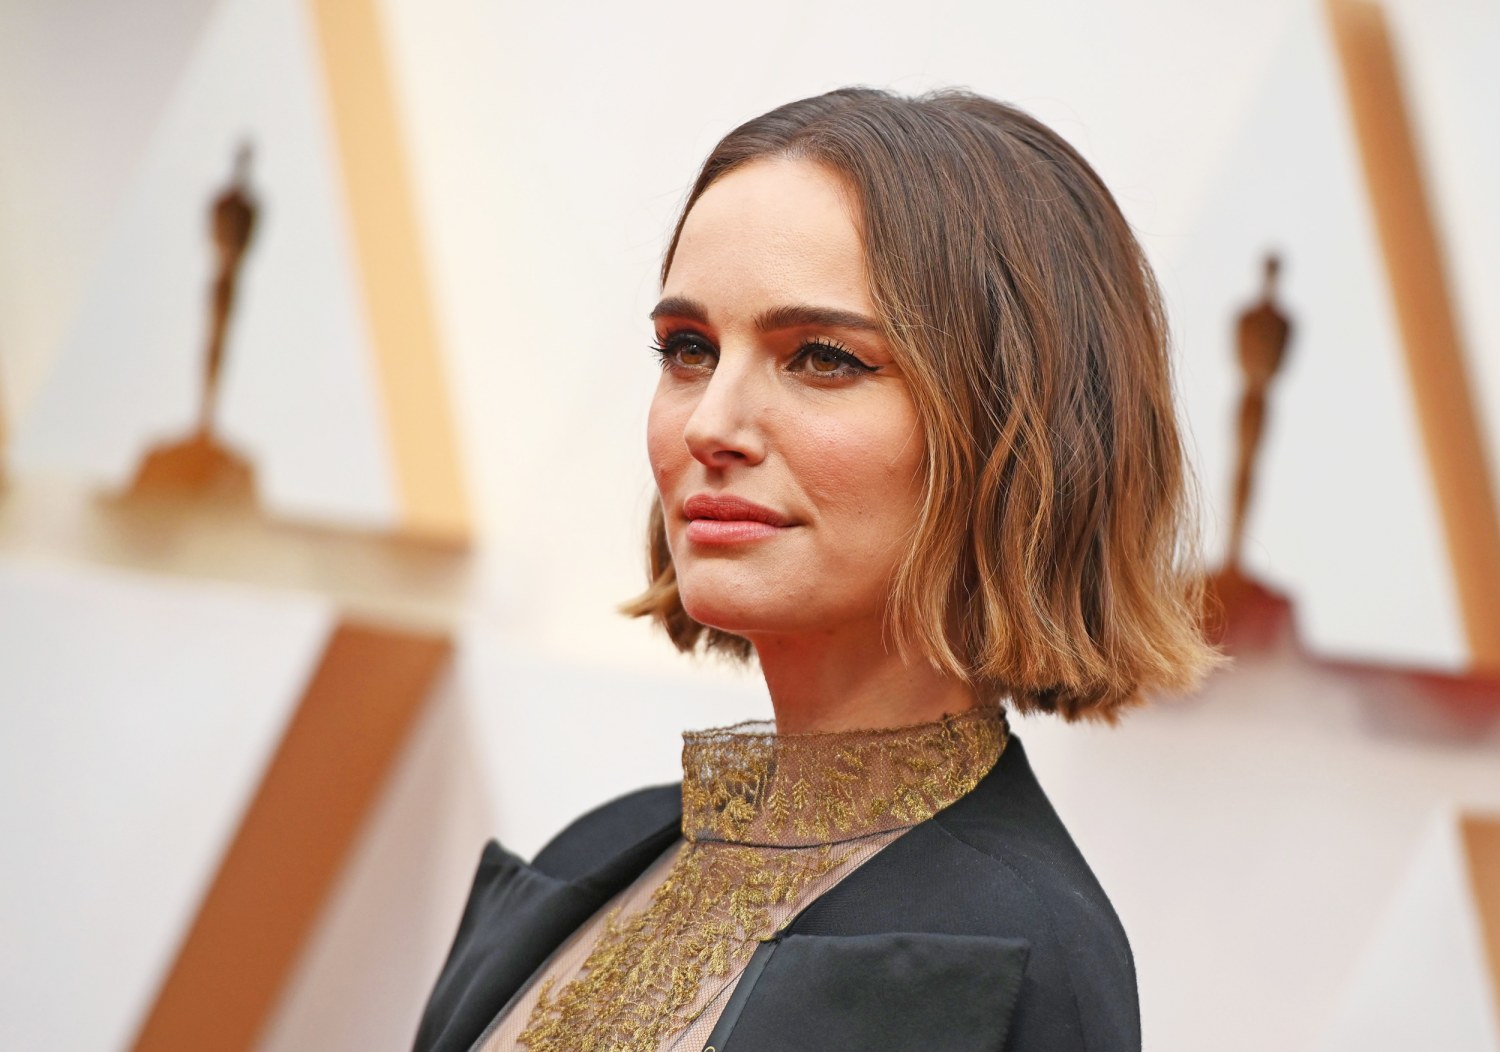 Natalie Portman says that sexualized roles as a teen harmed picture